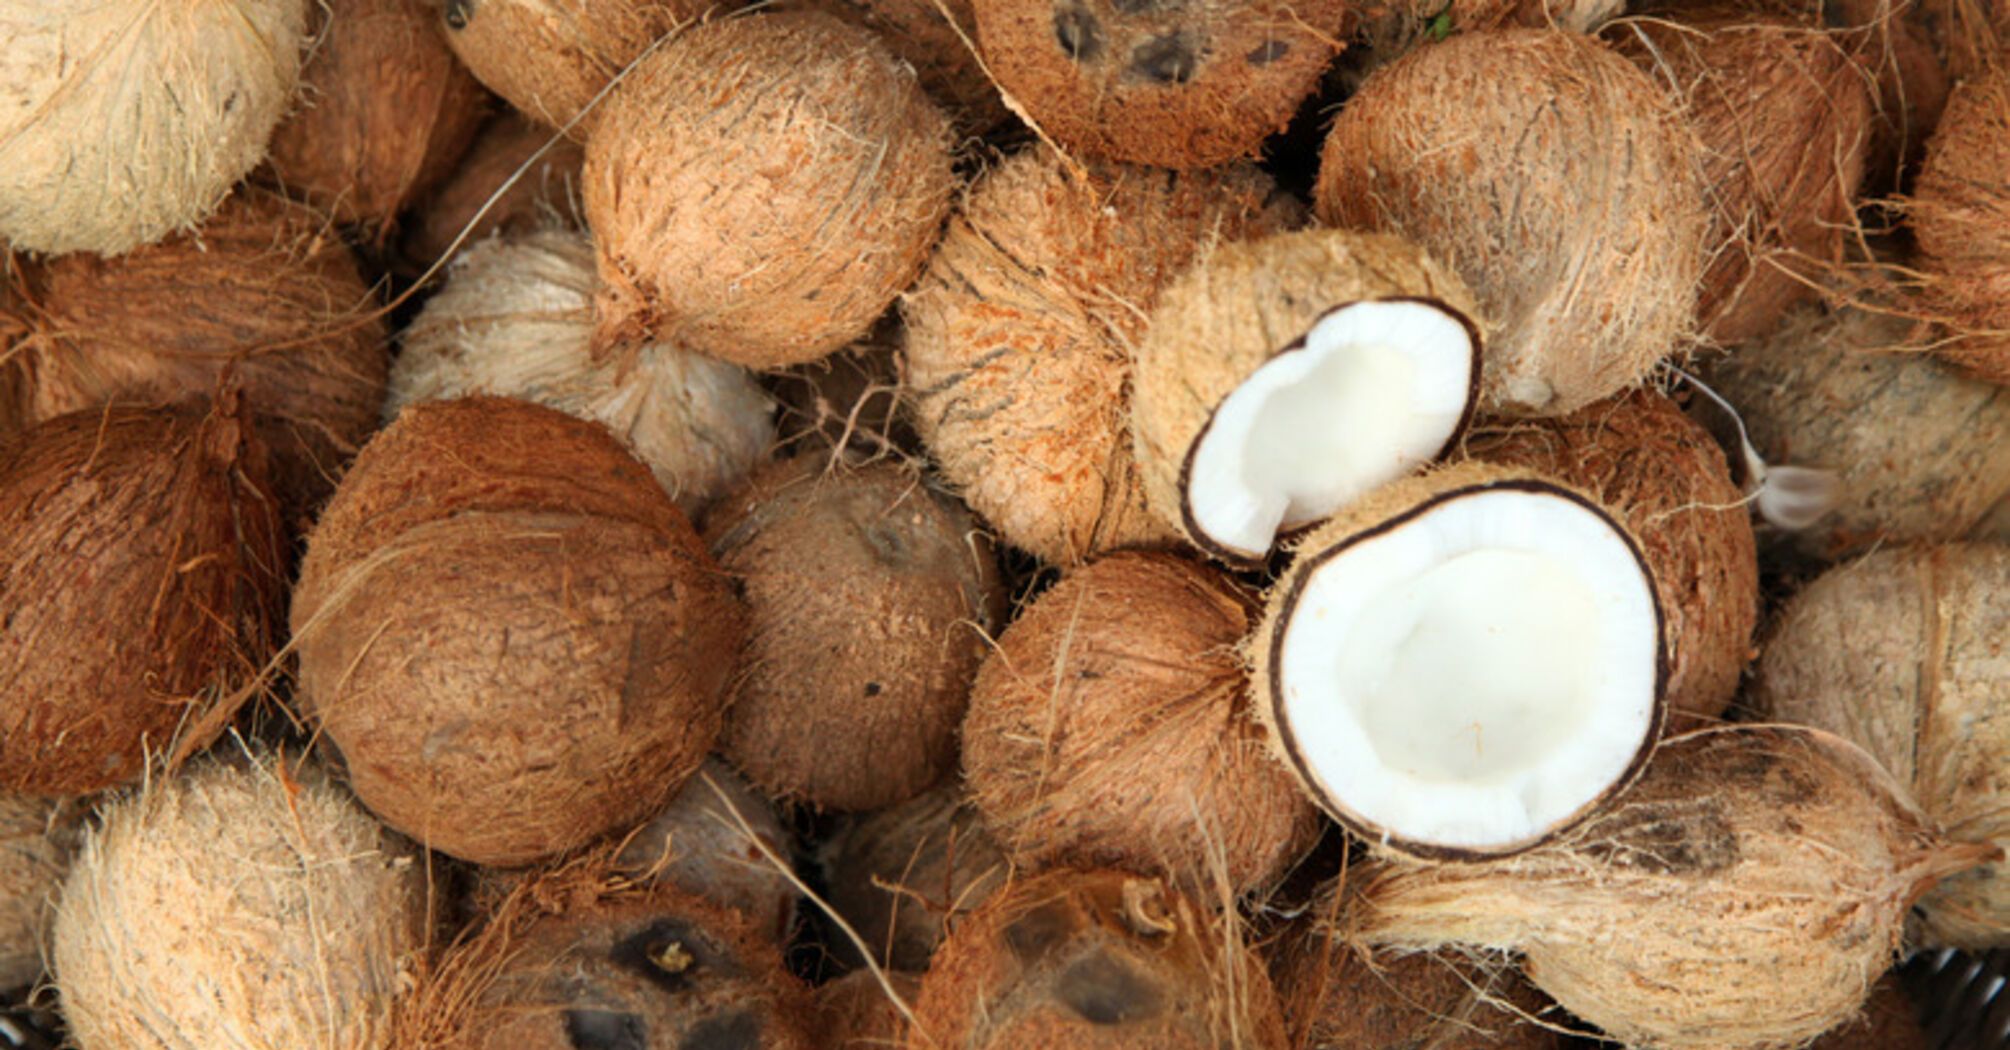 5 ways to use coconut shells